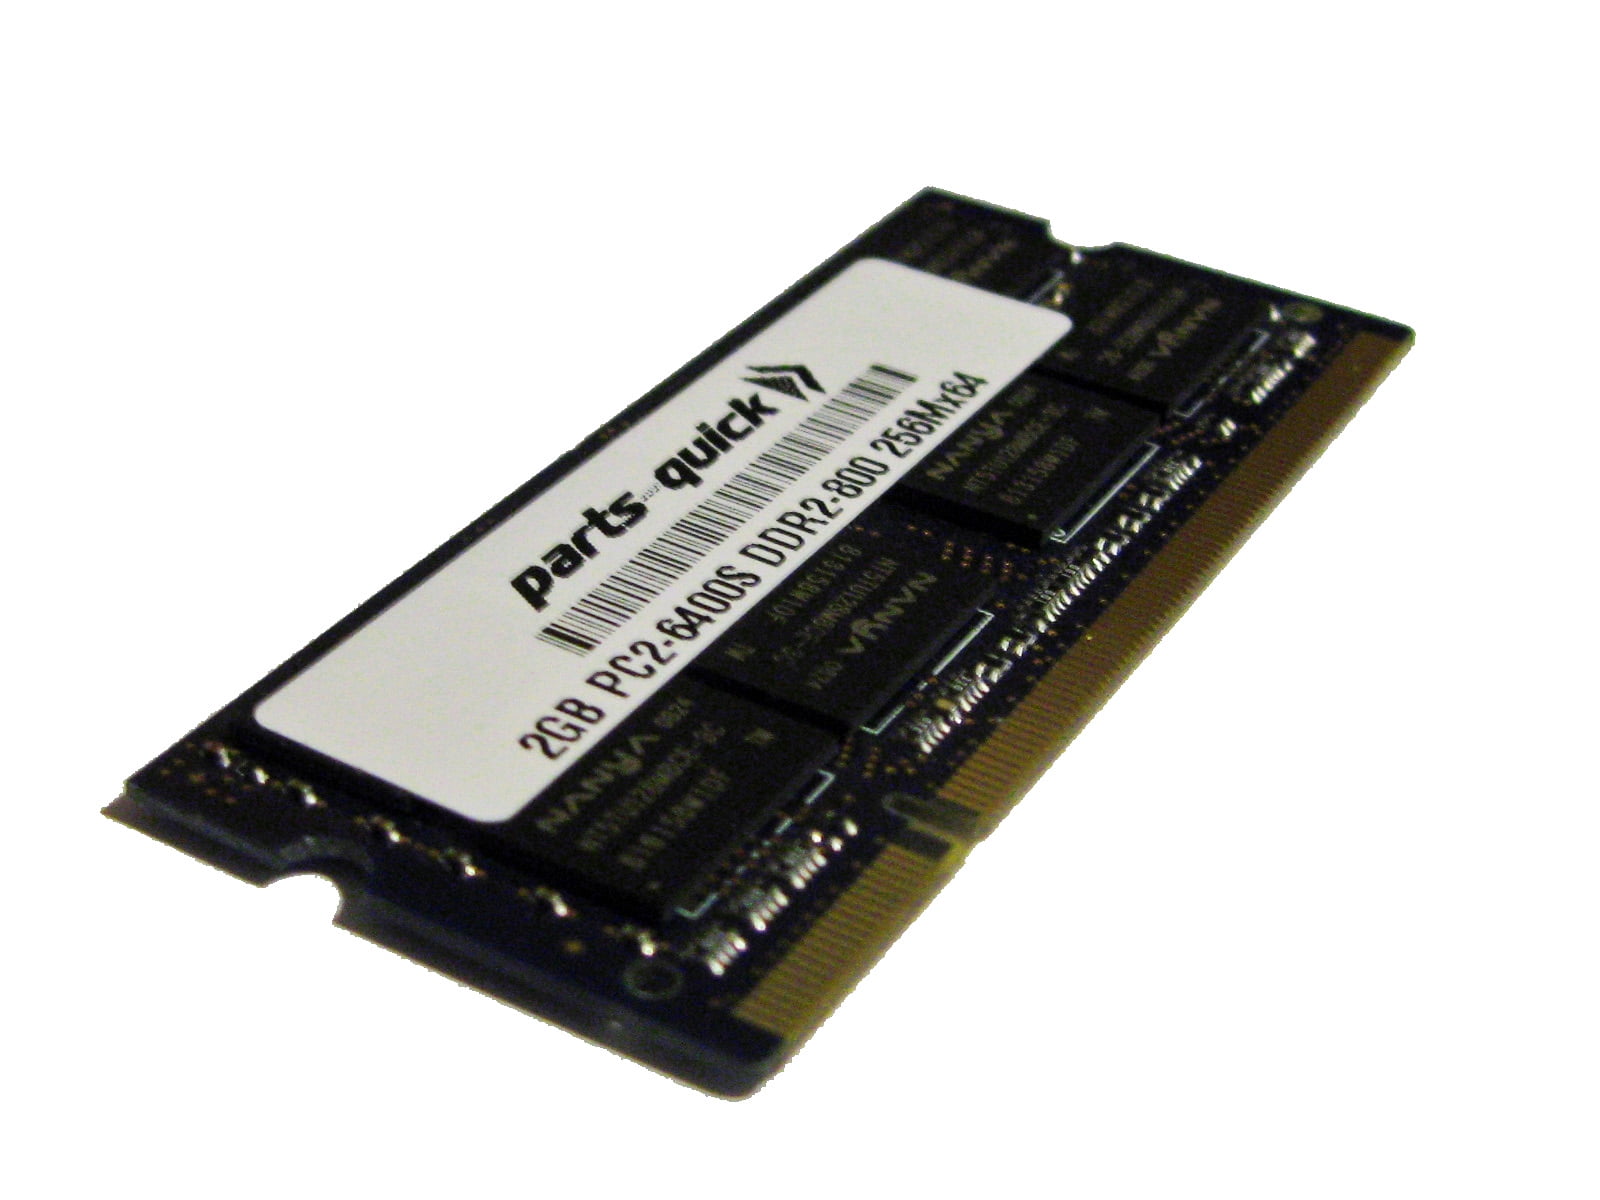 PC2-6400 RAM Memory Upgrade for The Toshiba Satellite L305D-S5927 4GB DDR2-800 